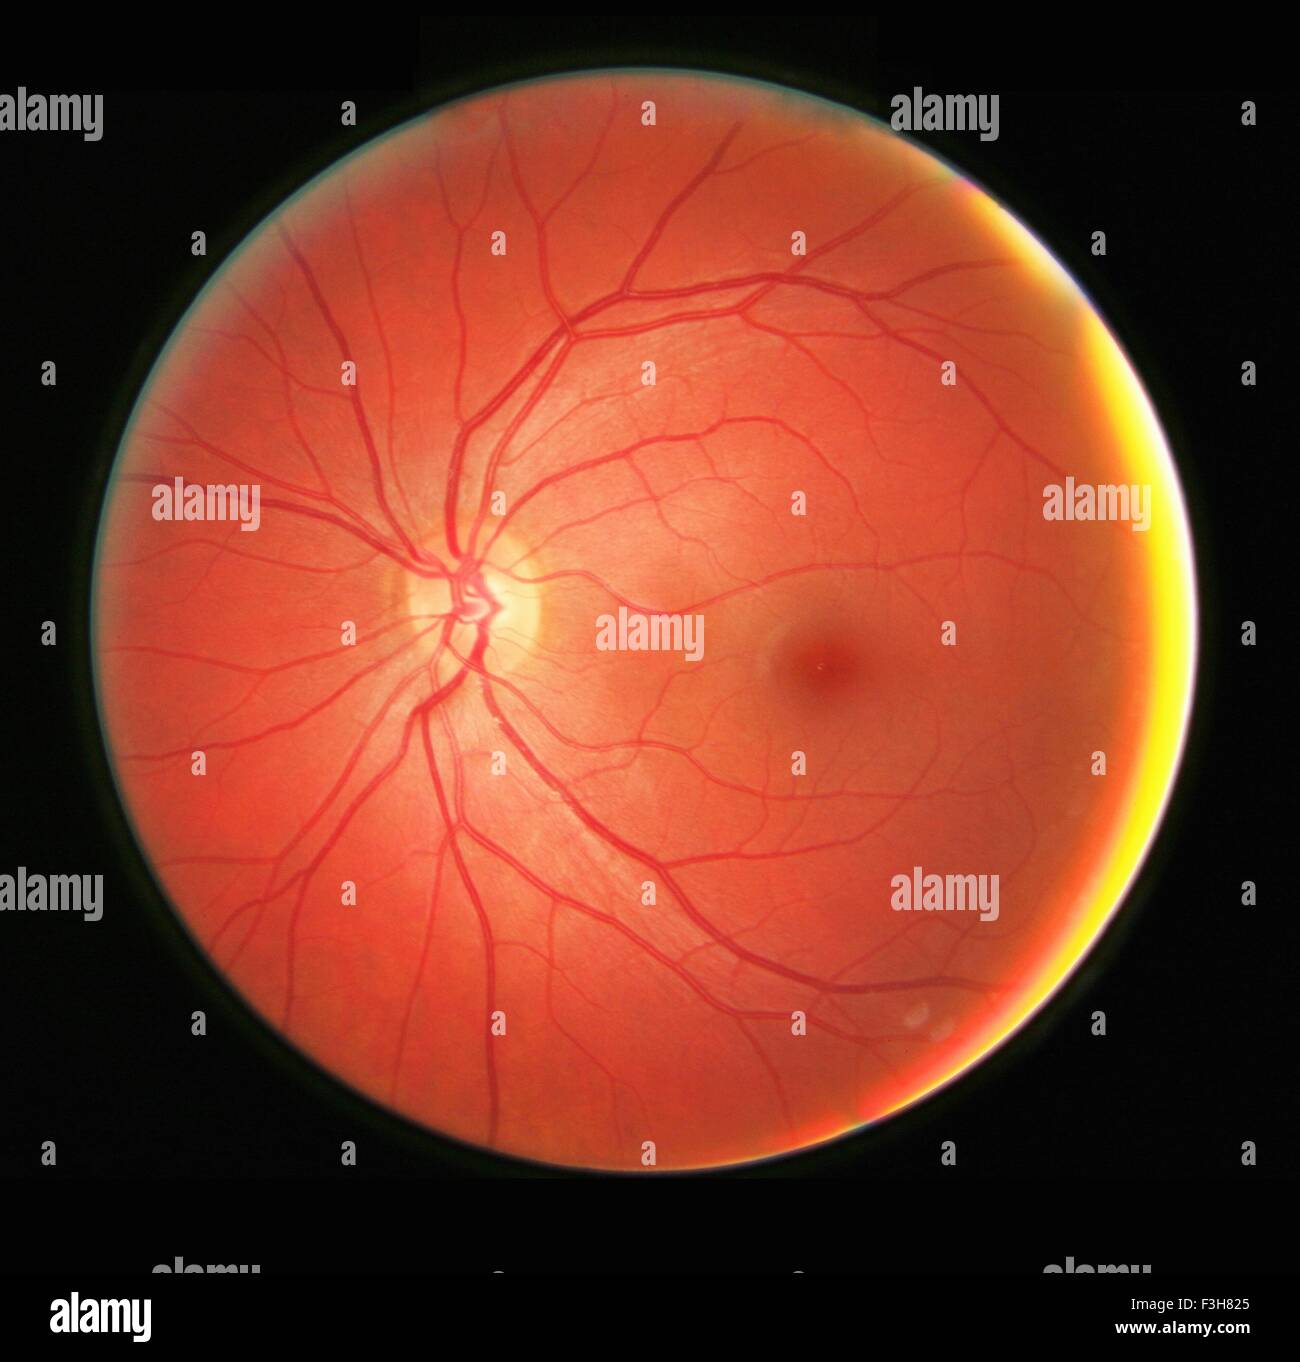 Fundus photograph of the left eye, showing the retina, macula, fovea and related structures Stock Photo